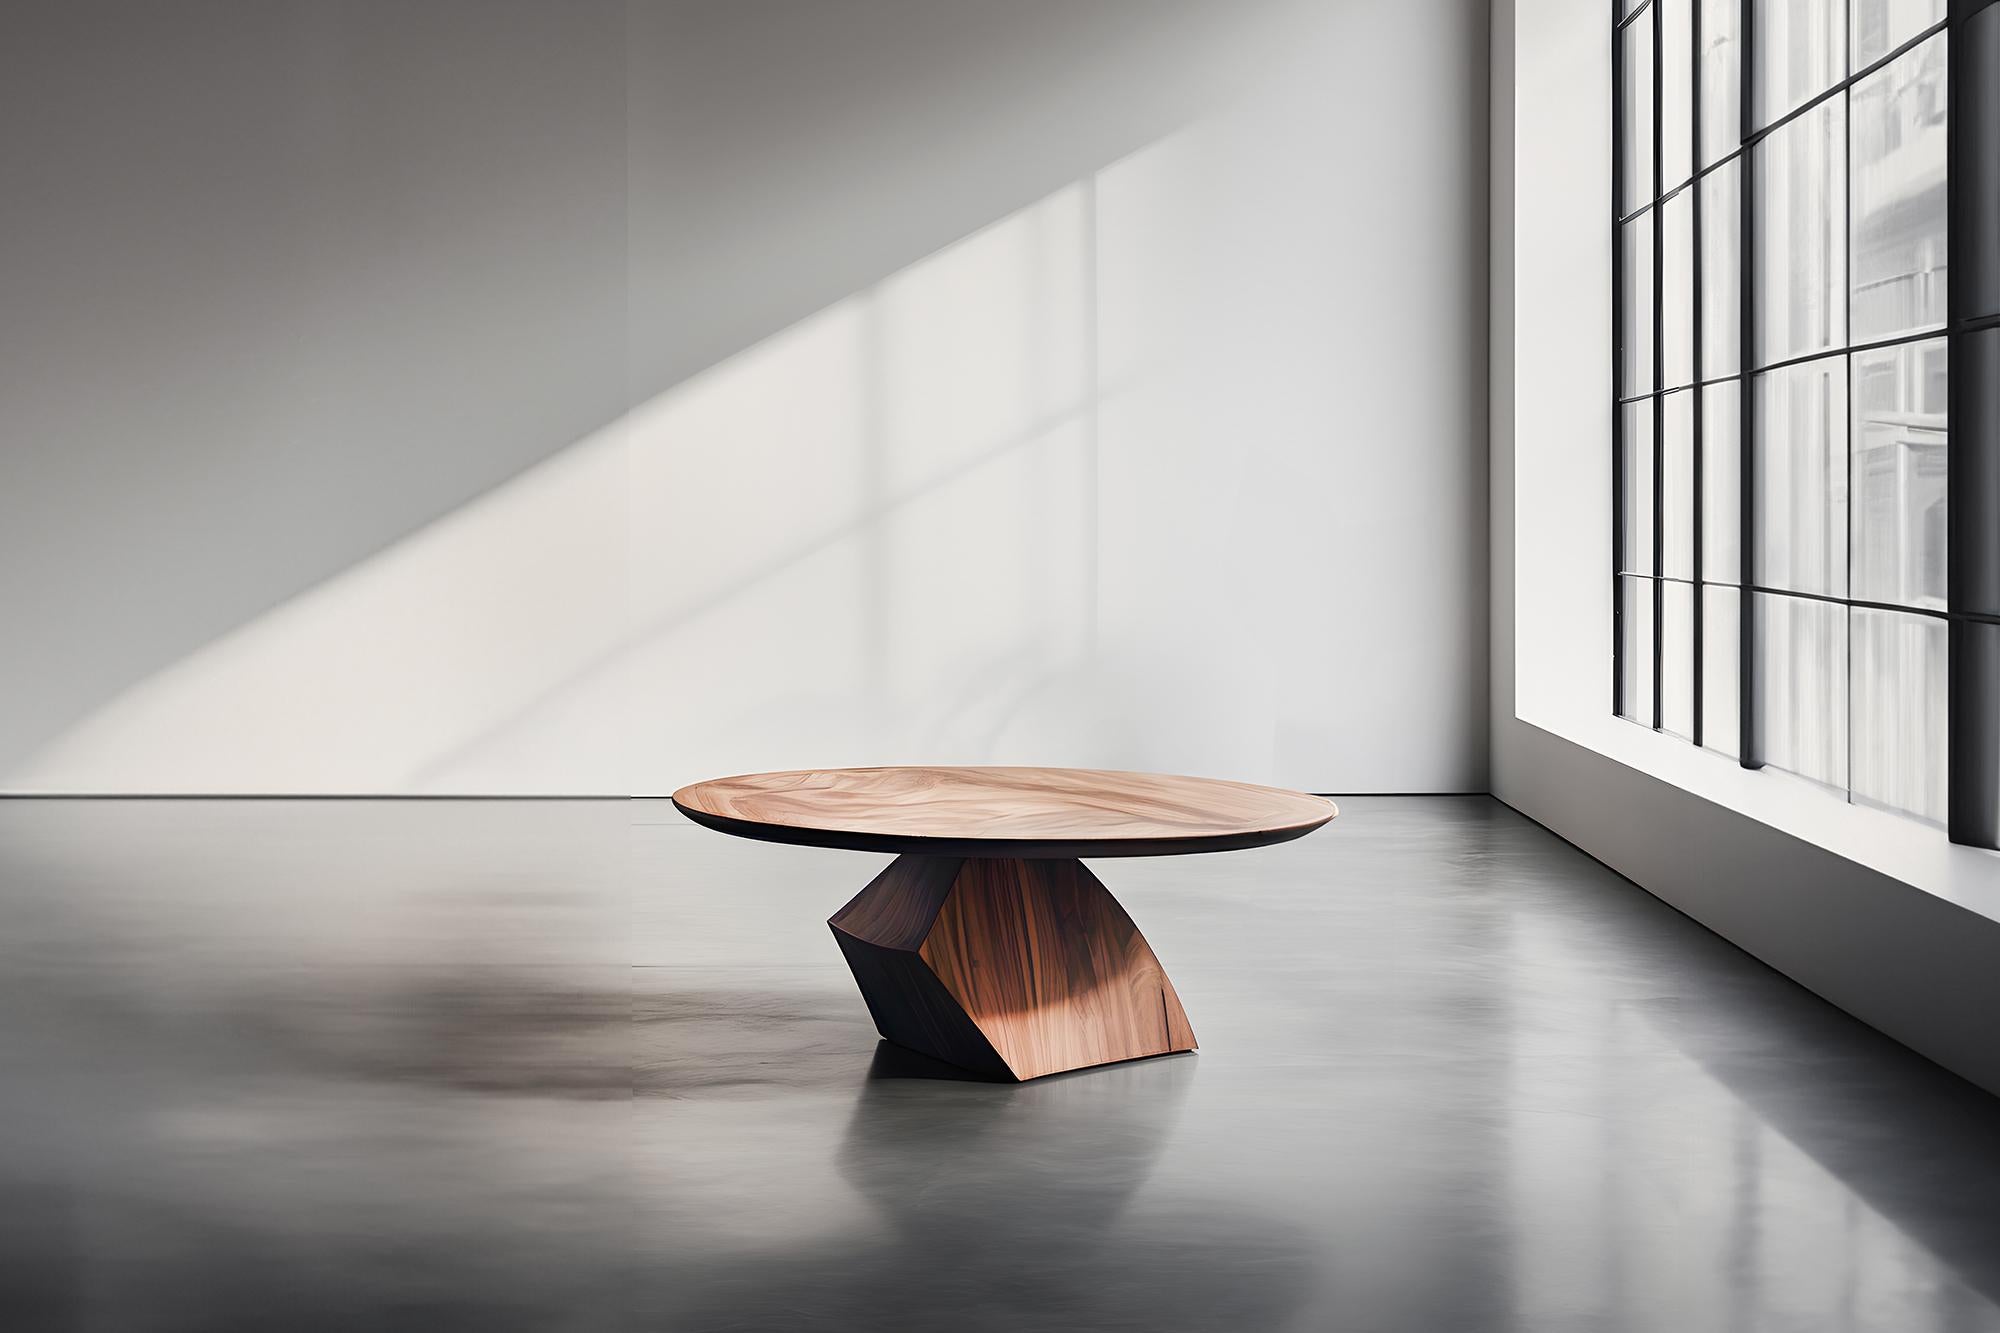 Sculptural Coffee Table Made of Solid Wood, Center Table Solace S36 by Joel Escalona


The Solace table series, designed by Joel Escalona, is a furniture collection that exudes balance and presence, thanks to its sensuous, dense, and irregular